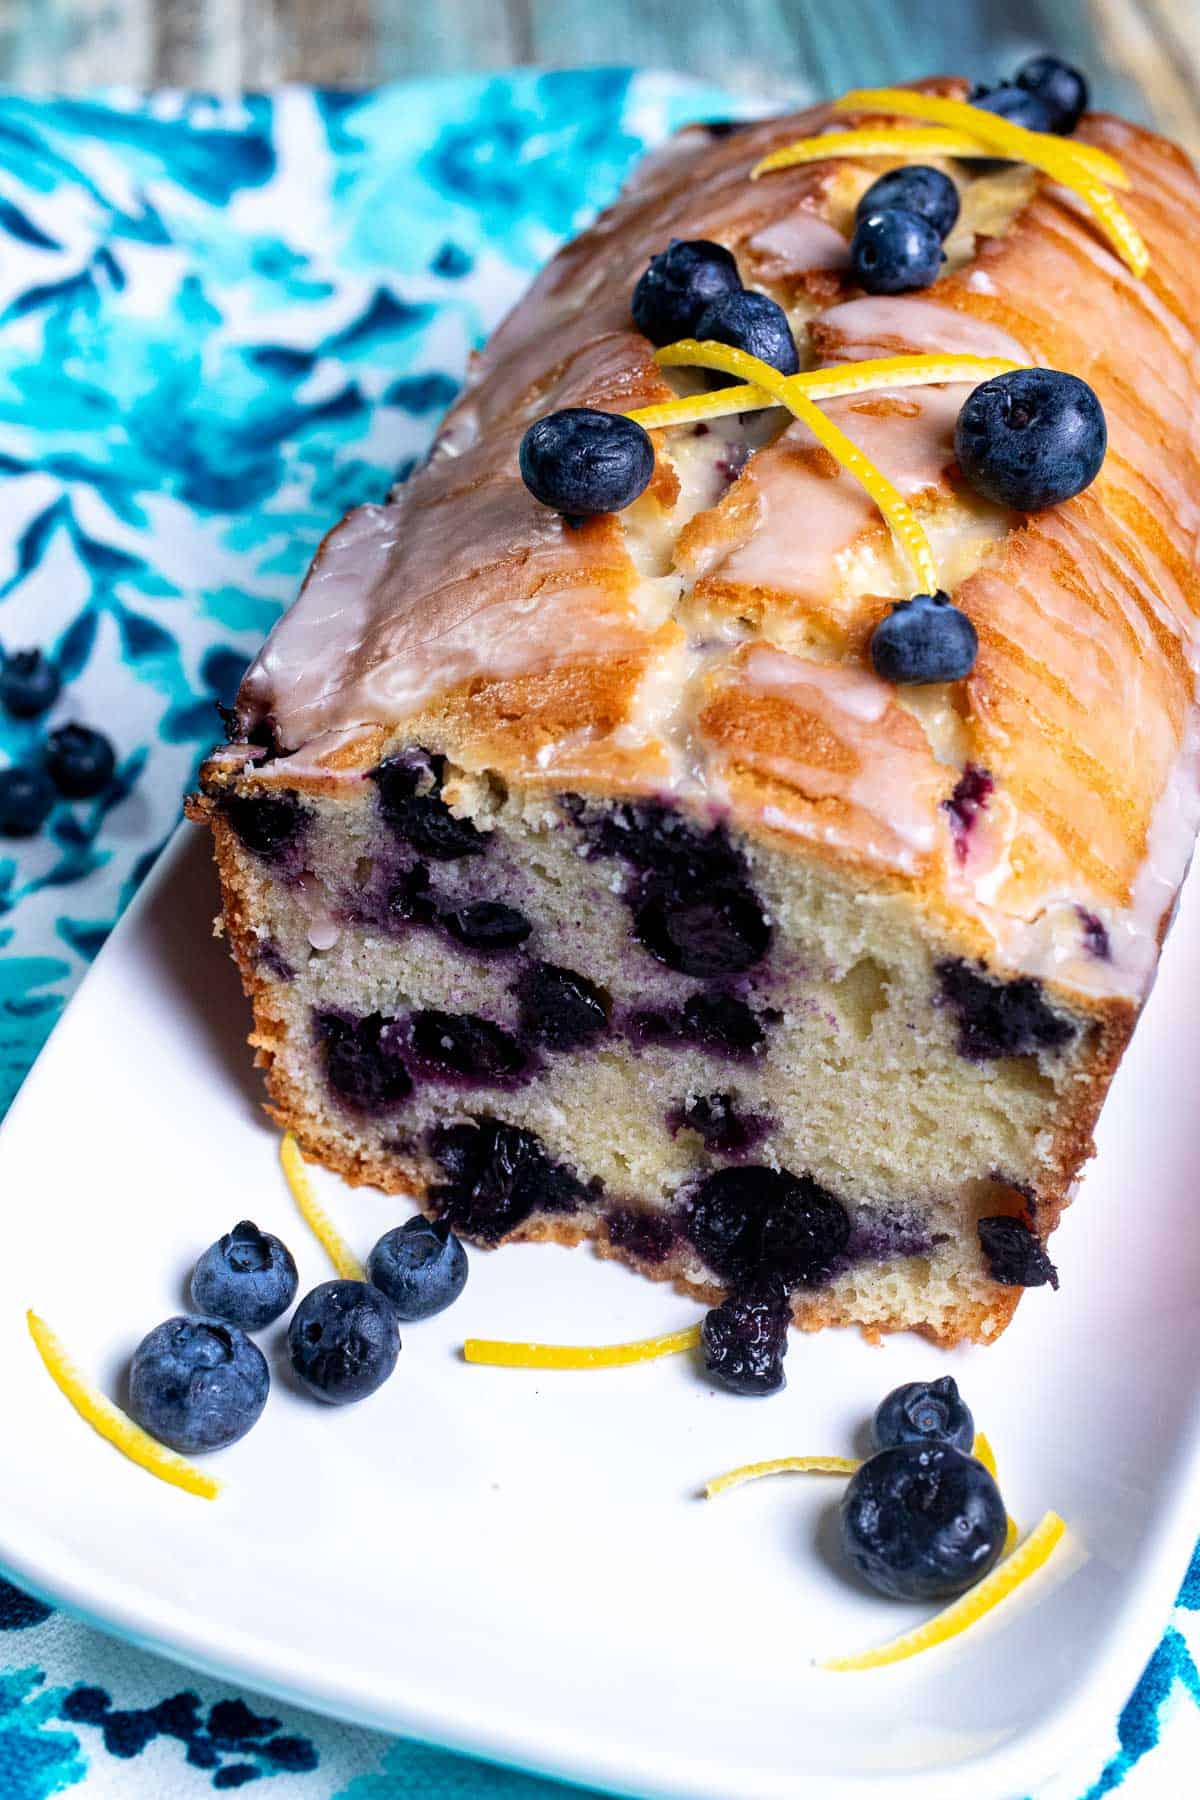 Angled view of a sliced, glazed, lemon blueberry pound cake on a white plate with blueberries and lemon zest around it.